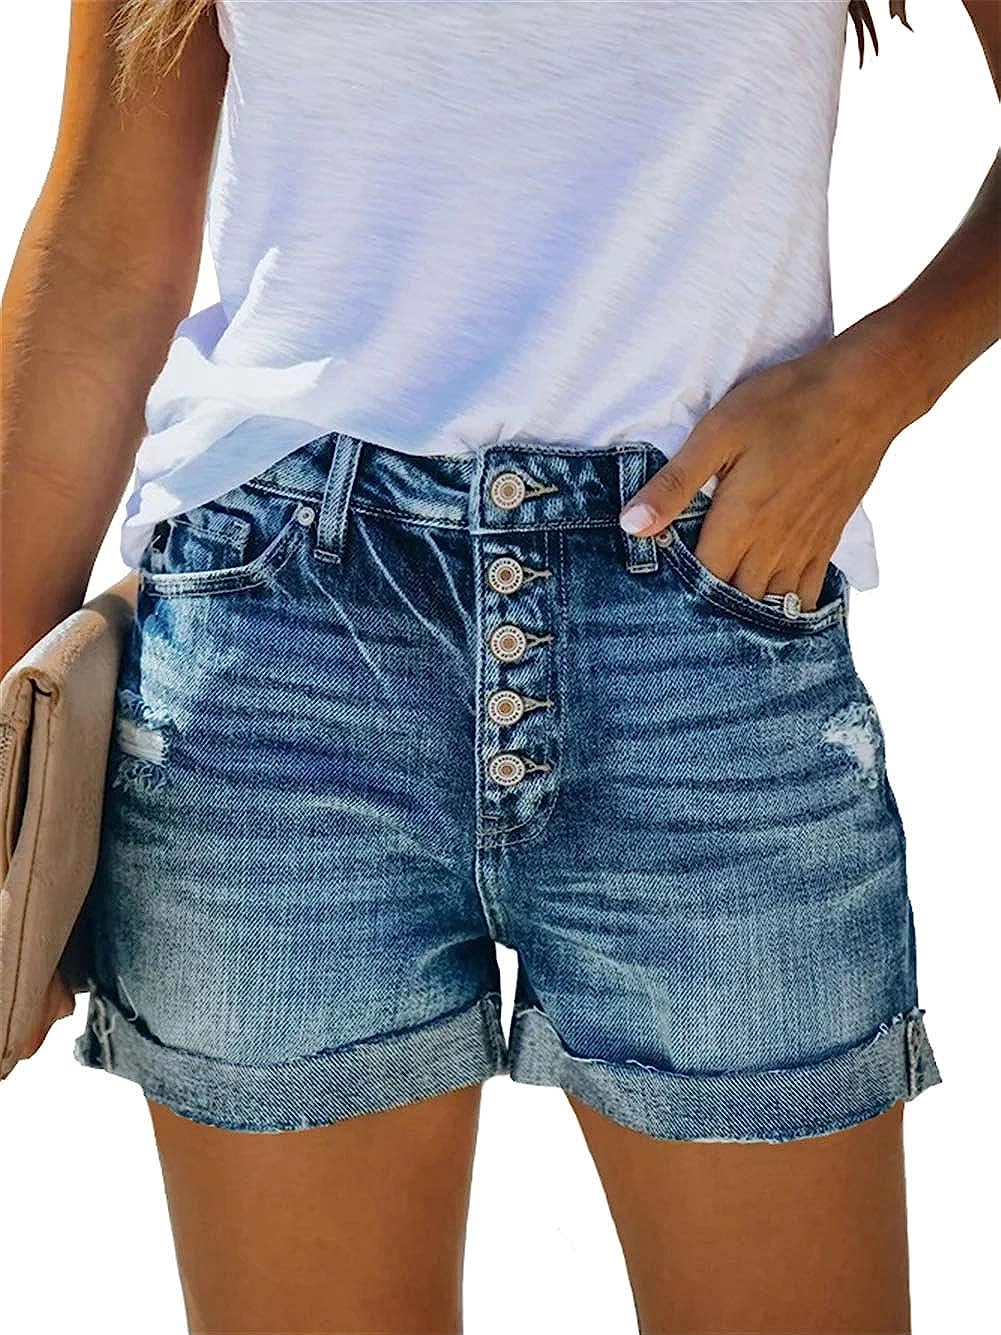 Women Mid Rise Ripped Jean Shorts From Bangladesh Garments Factory